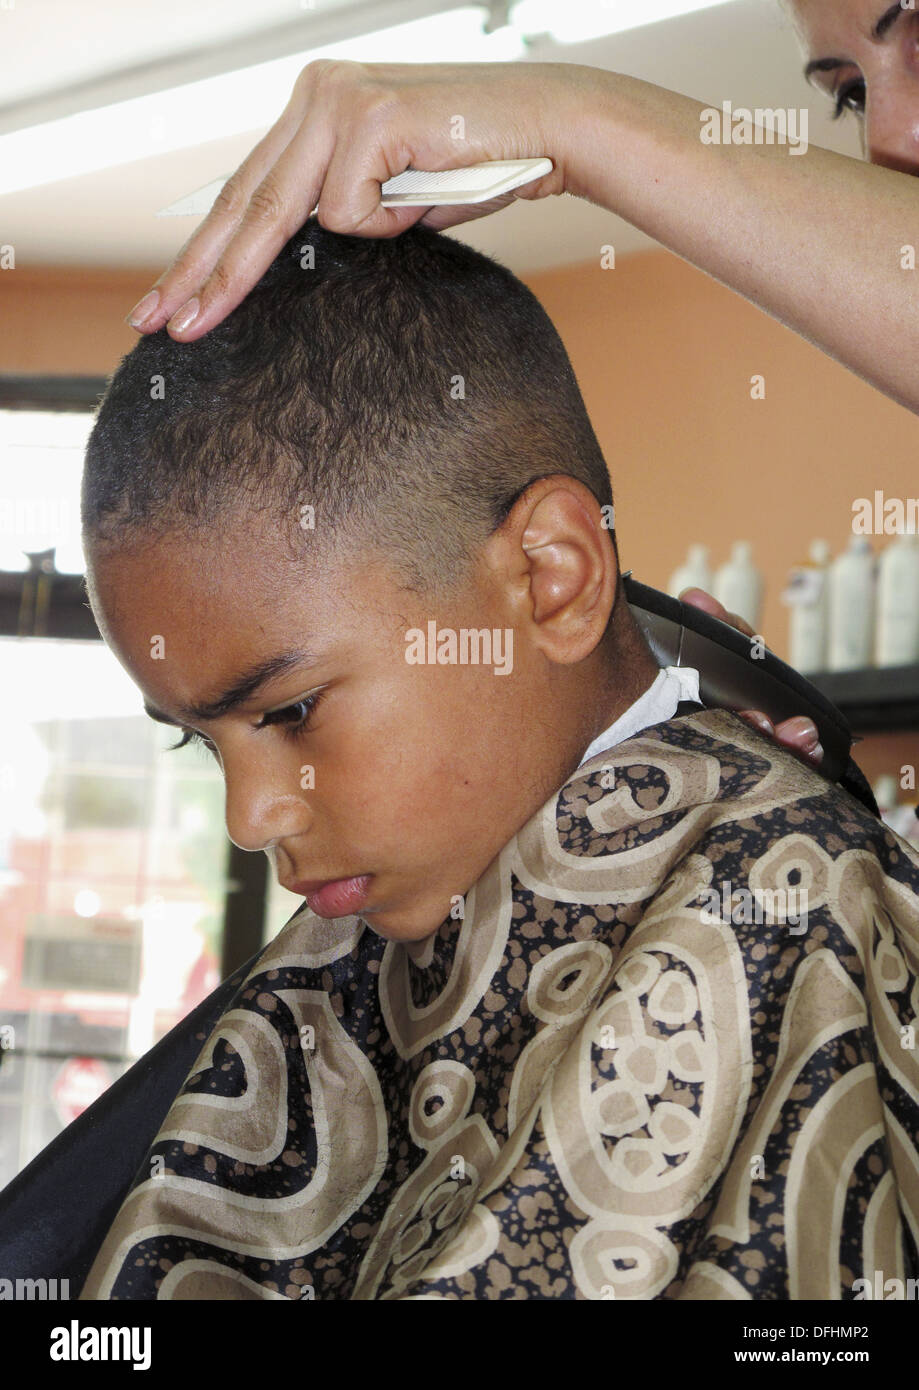 6 year old African American boy getting a hair cut Making a face Stock  Photo - Alamy